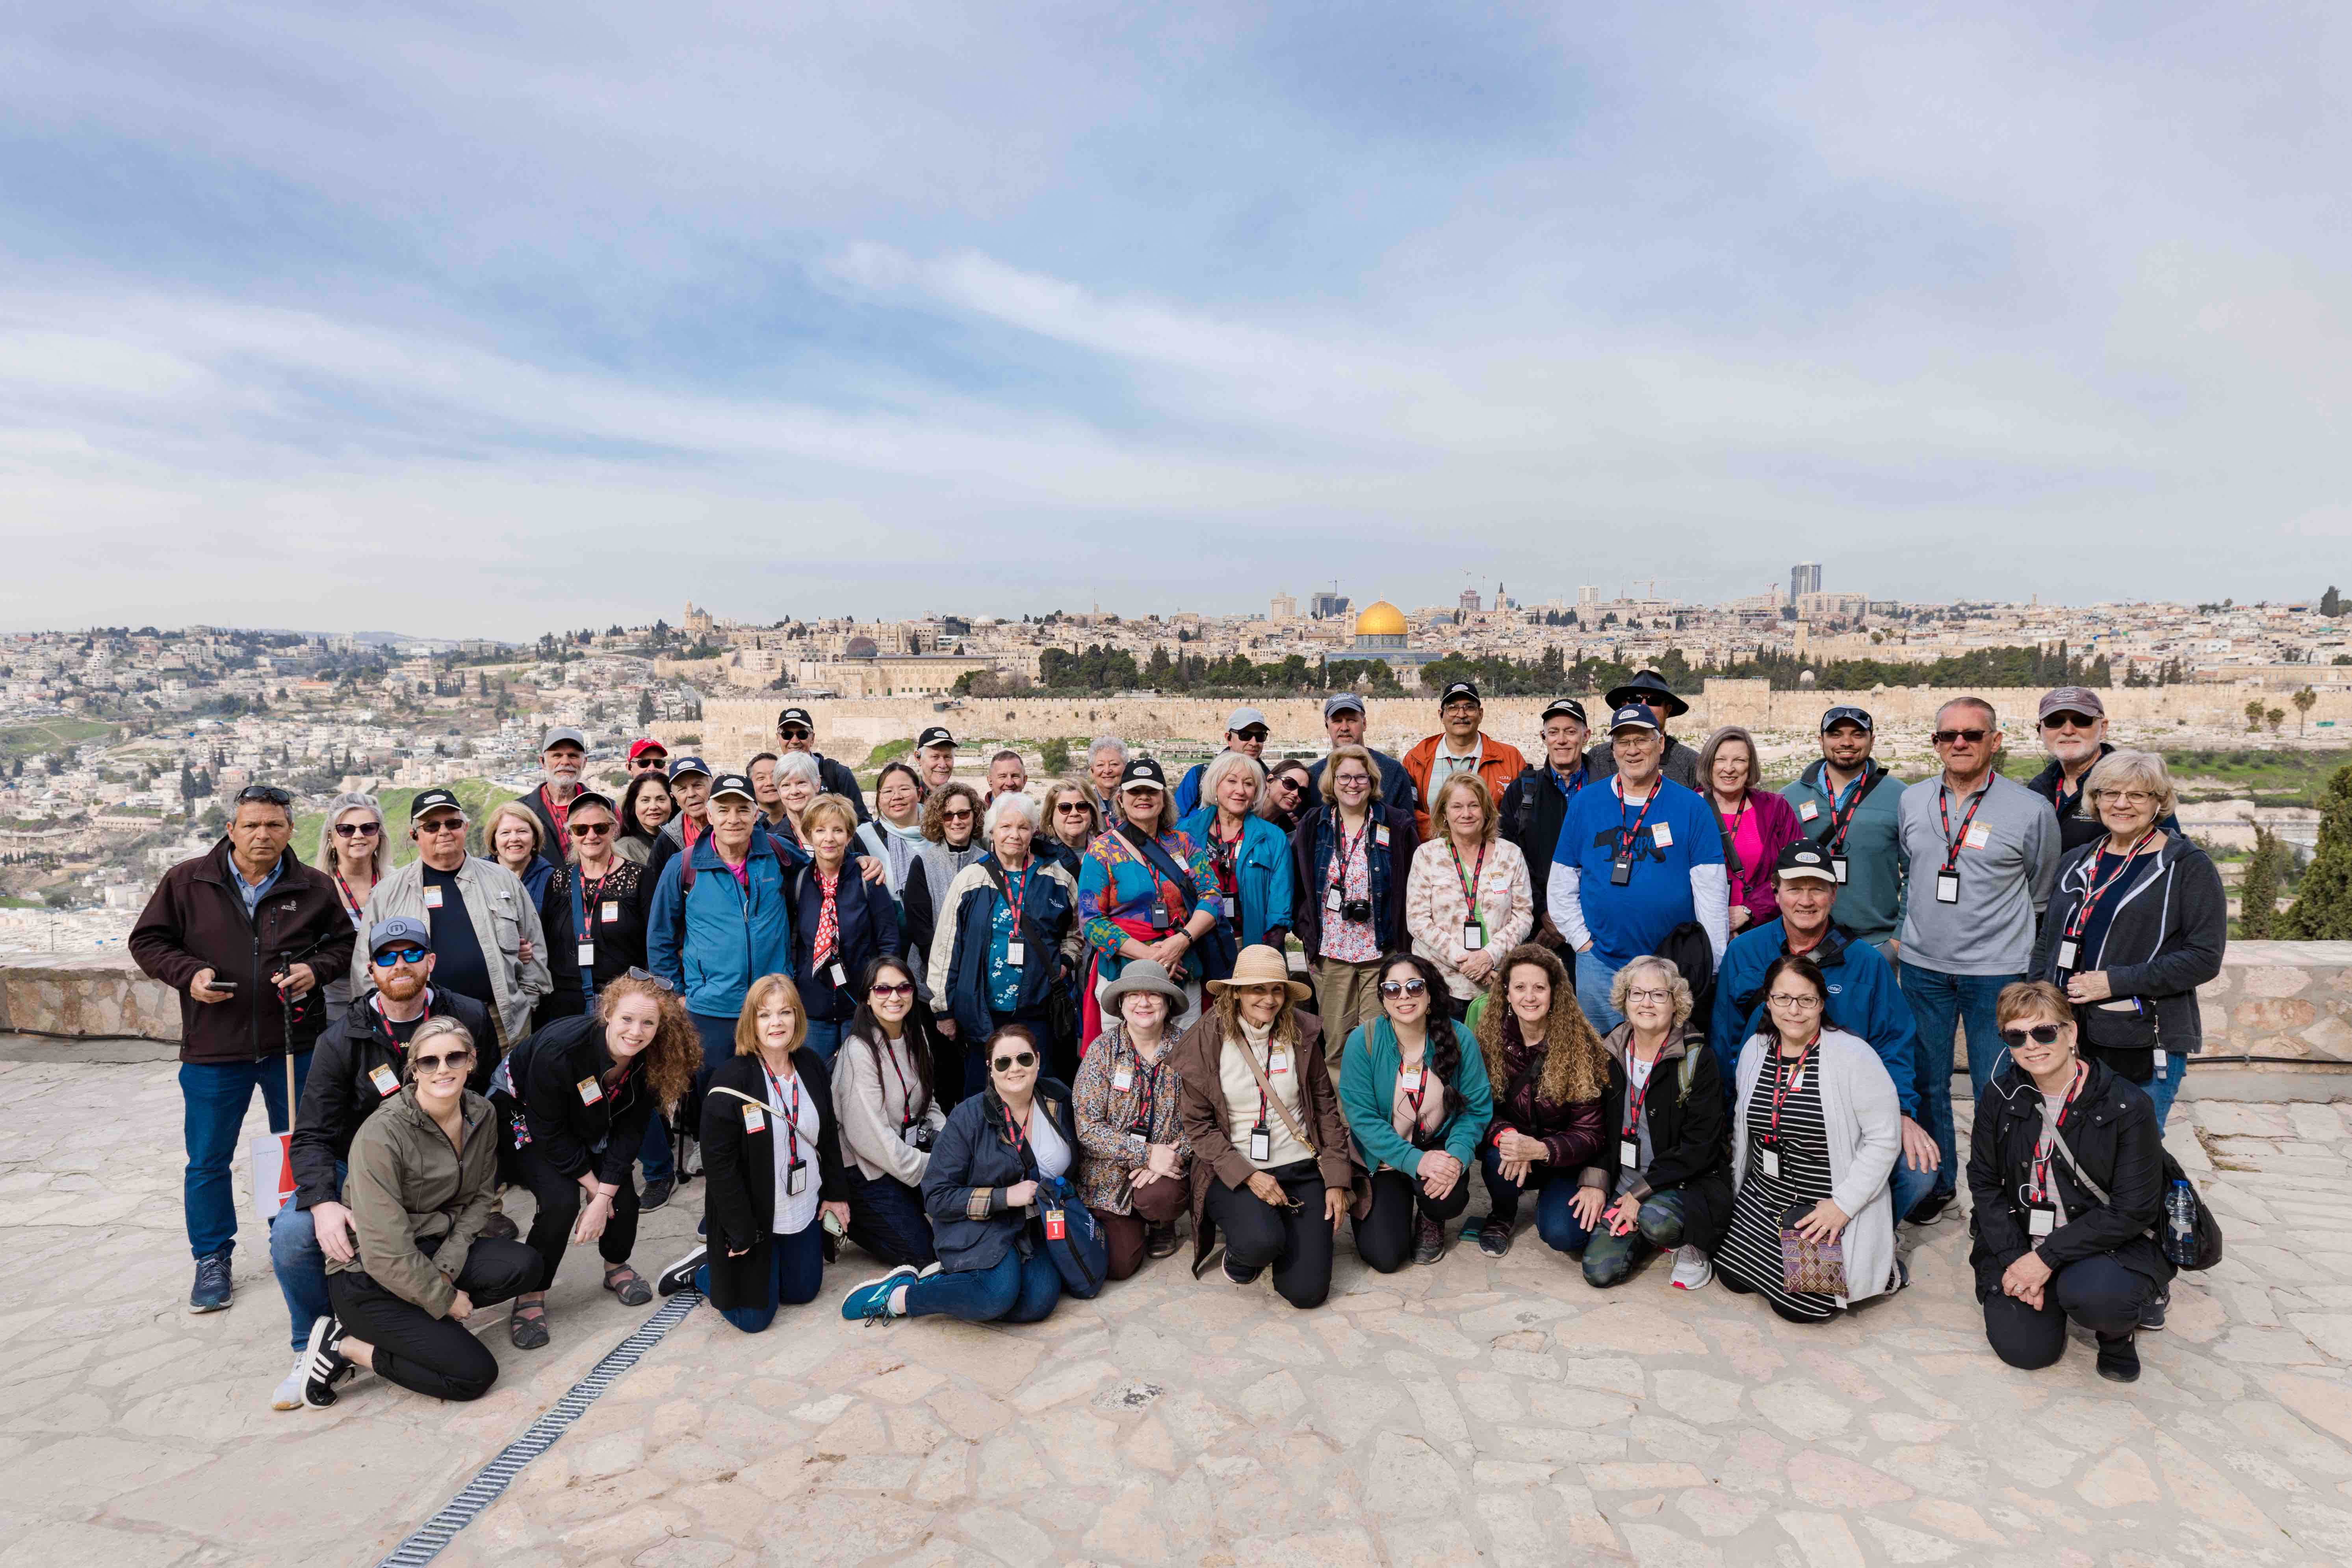 Inspiration tour group standing together with the city of Jerusalem in the background